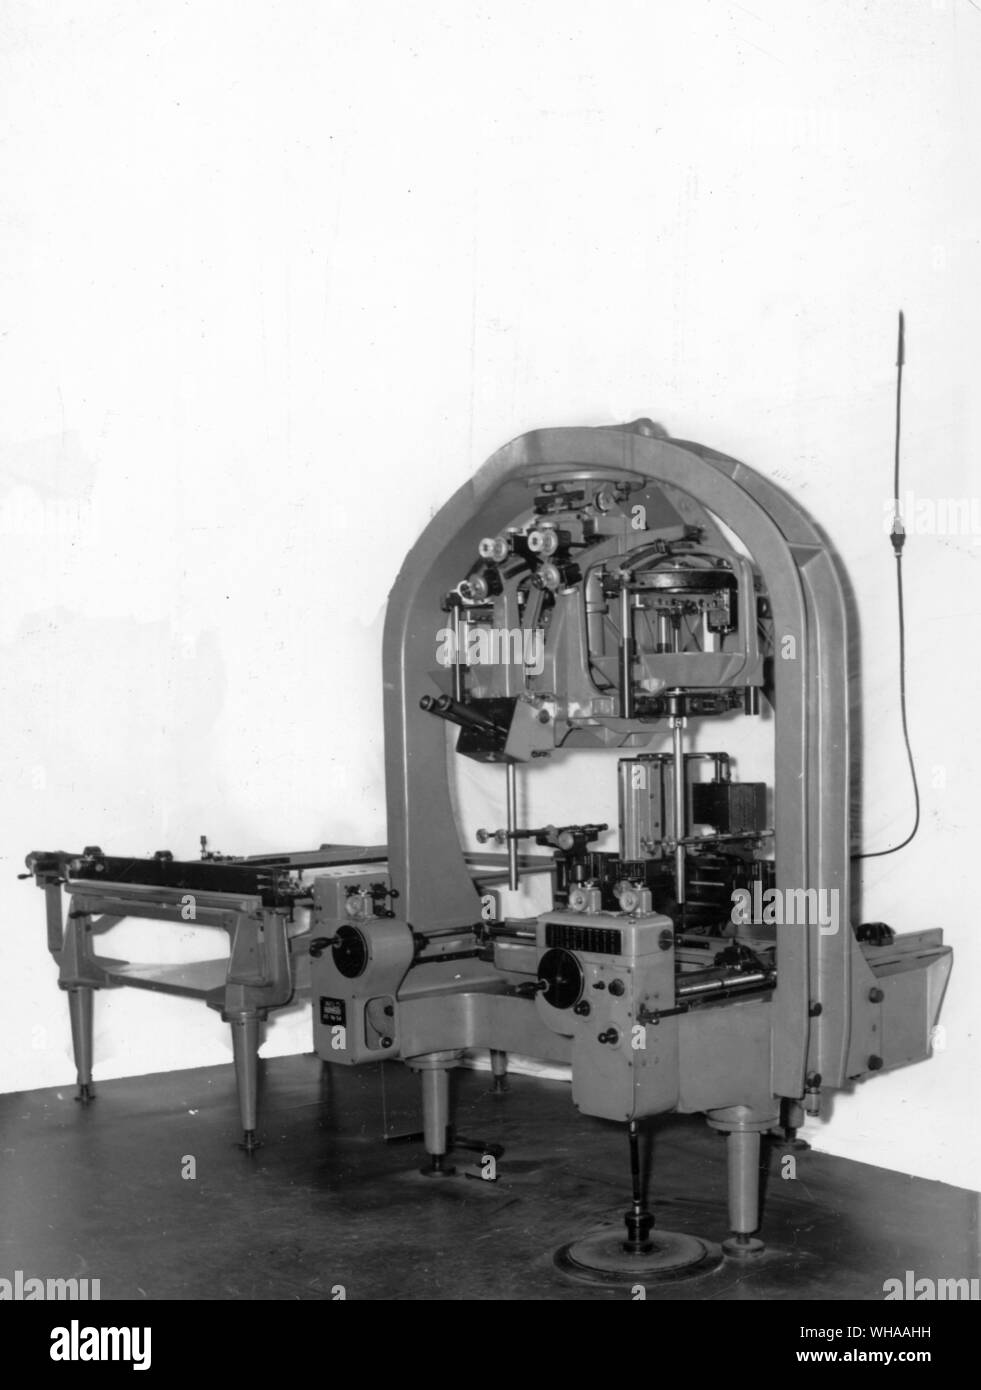 An optical mechanical type of plotting machine. The goniometers representing the two camera positions may be seen with the space rods representing the rays to detail points projecting below them. In the photograph the space rods are both vertical but during actual plotting they would be convergent. The plotting table is at the left. Stock Photo